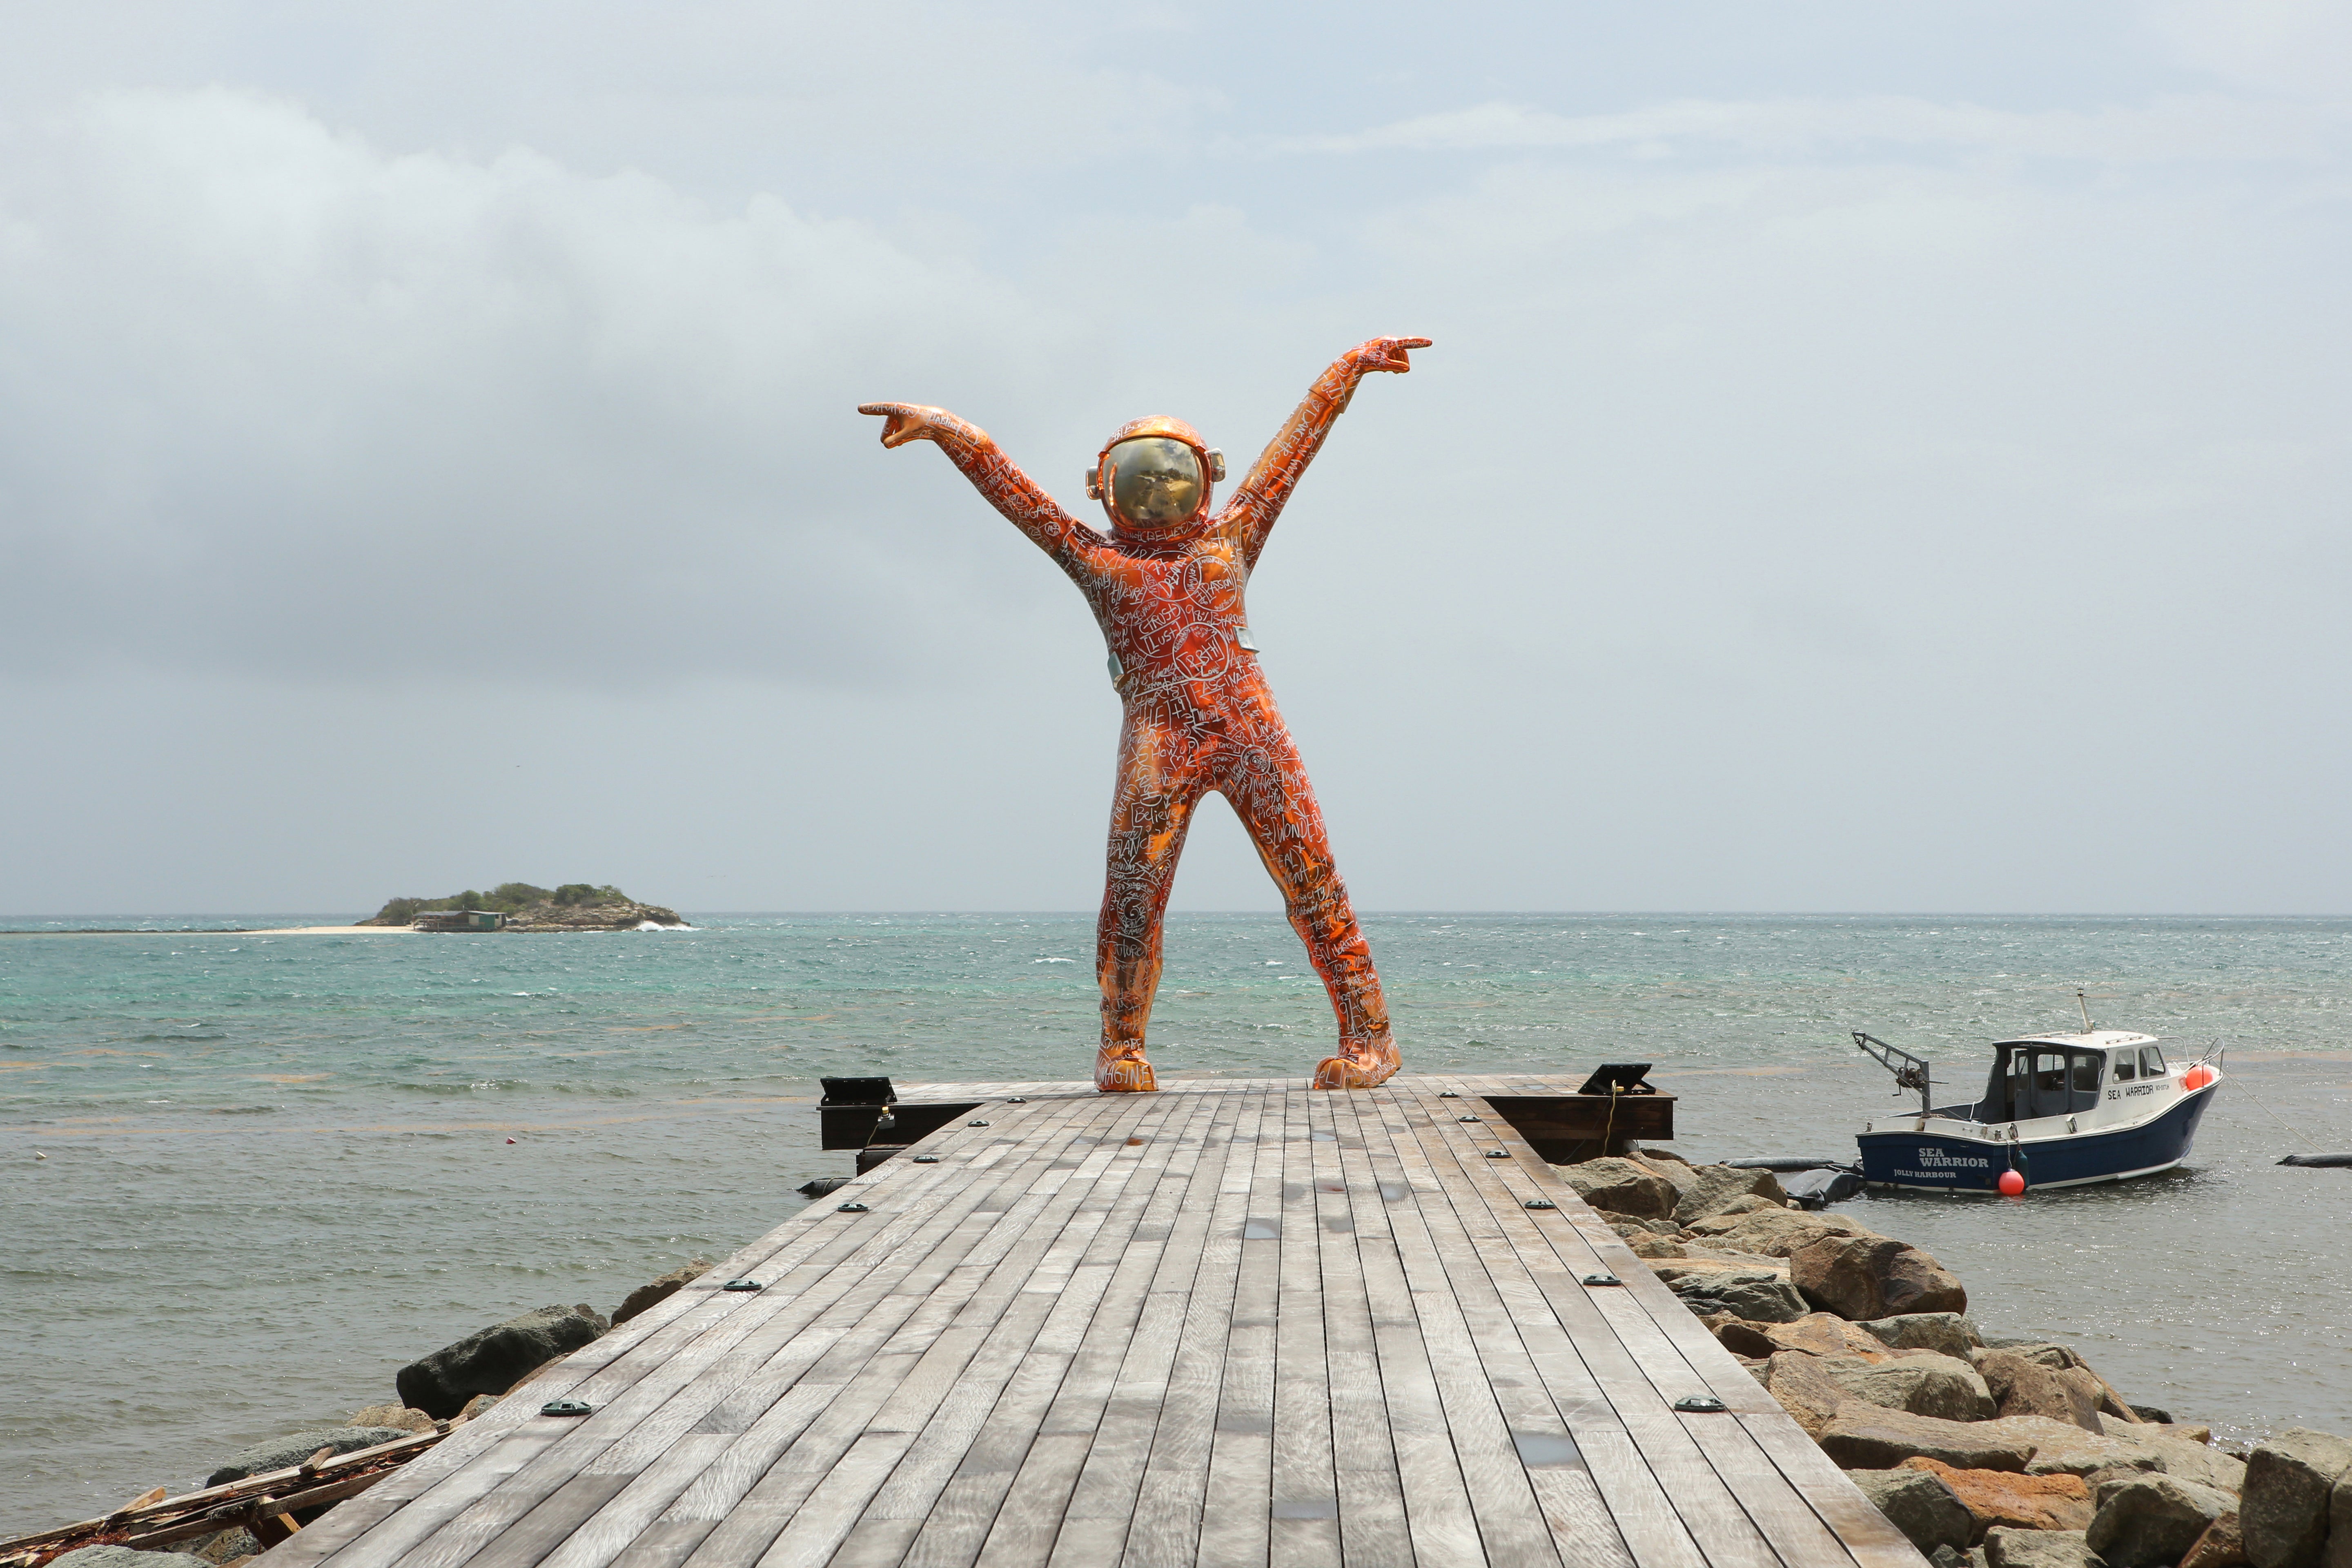 Antigua’s new 22ft, 3,000 pound sculpture Boonji Spaceman, standing at the end of a small pier at Hodges Bay resort on Antigua’s north coast. The piece was designed by Malibu-based artist Brendan Murphy, with its aim to lift the human spirit highlighting the artist’s fascination with space. Picture date: Saturday, July 24, 2021. Photographer: Johnny Green/PA